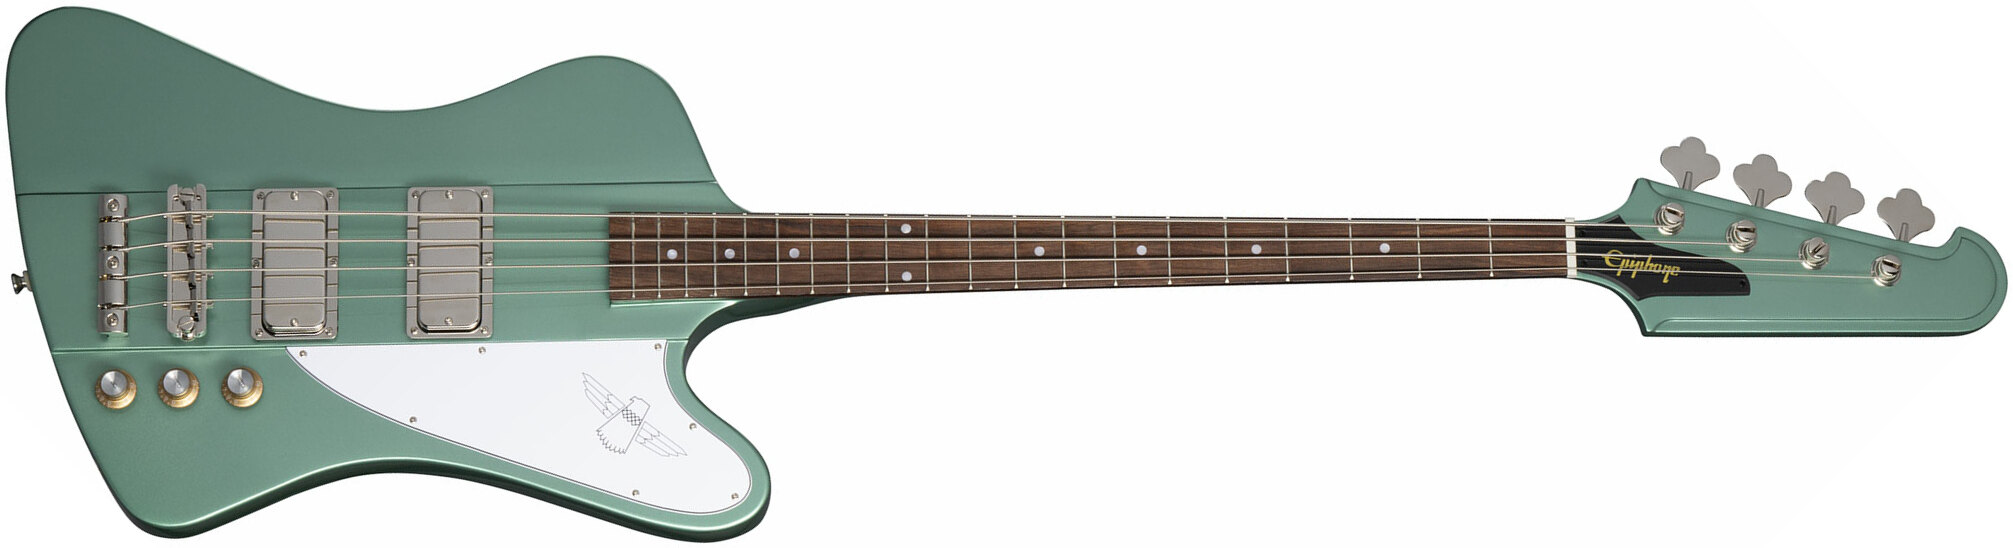 Epiphone Thunderbird 1964 Original Lau - Inverness Green - Solid body electric bass - Main picture